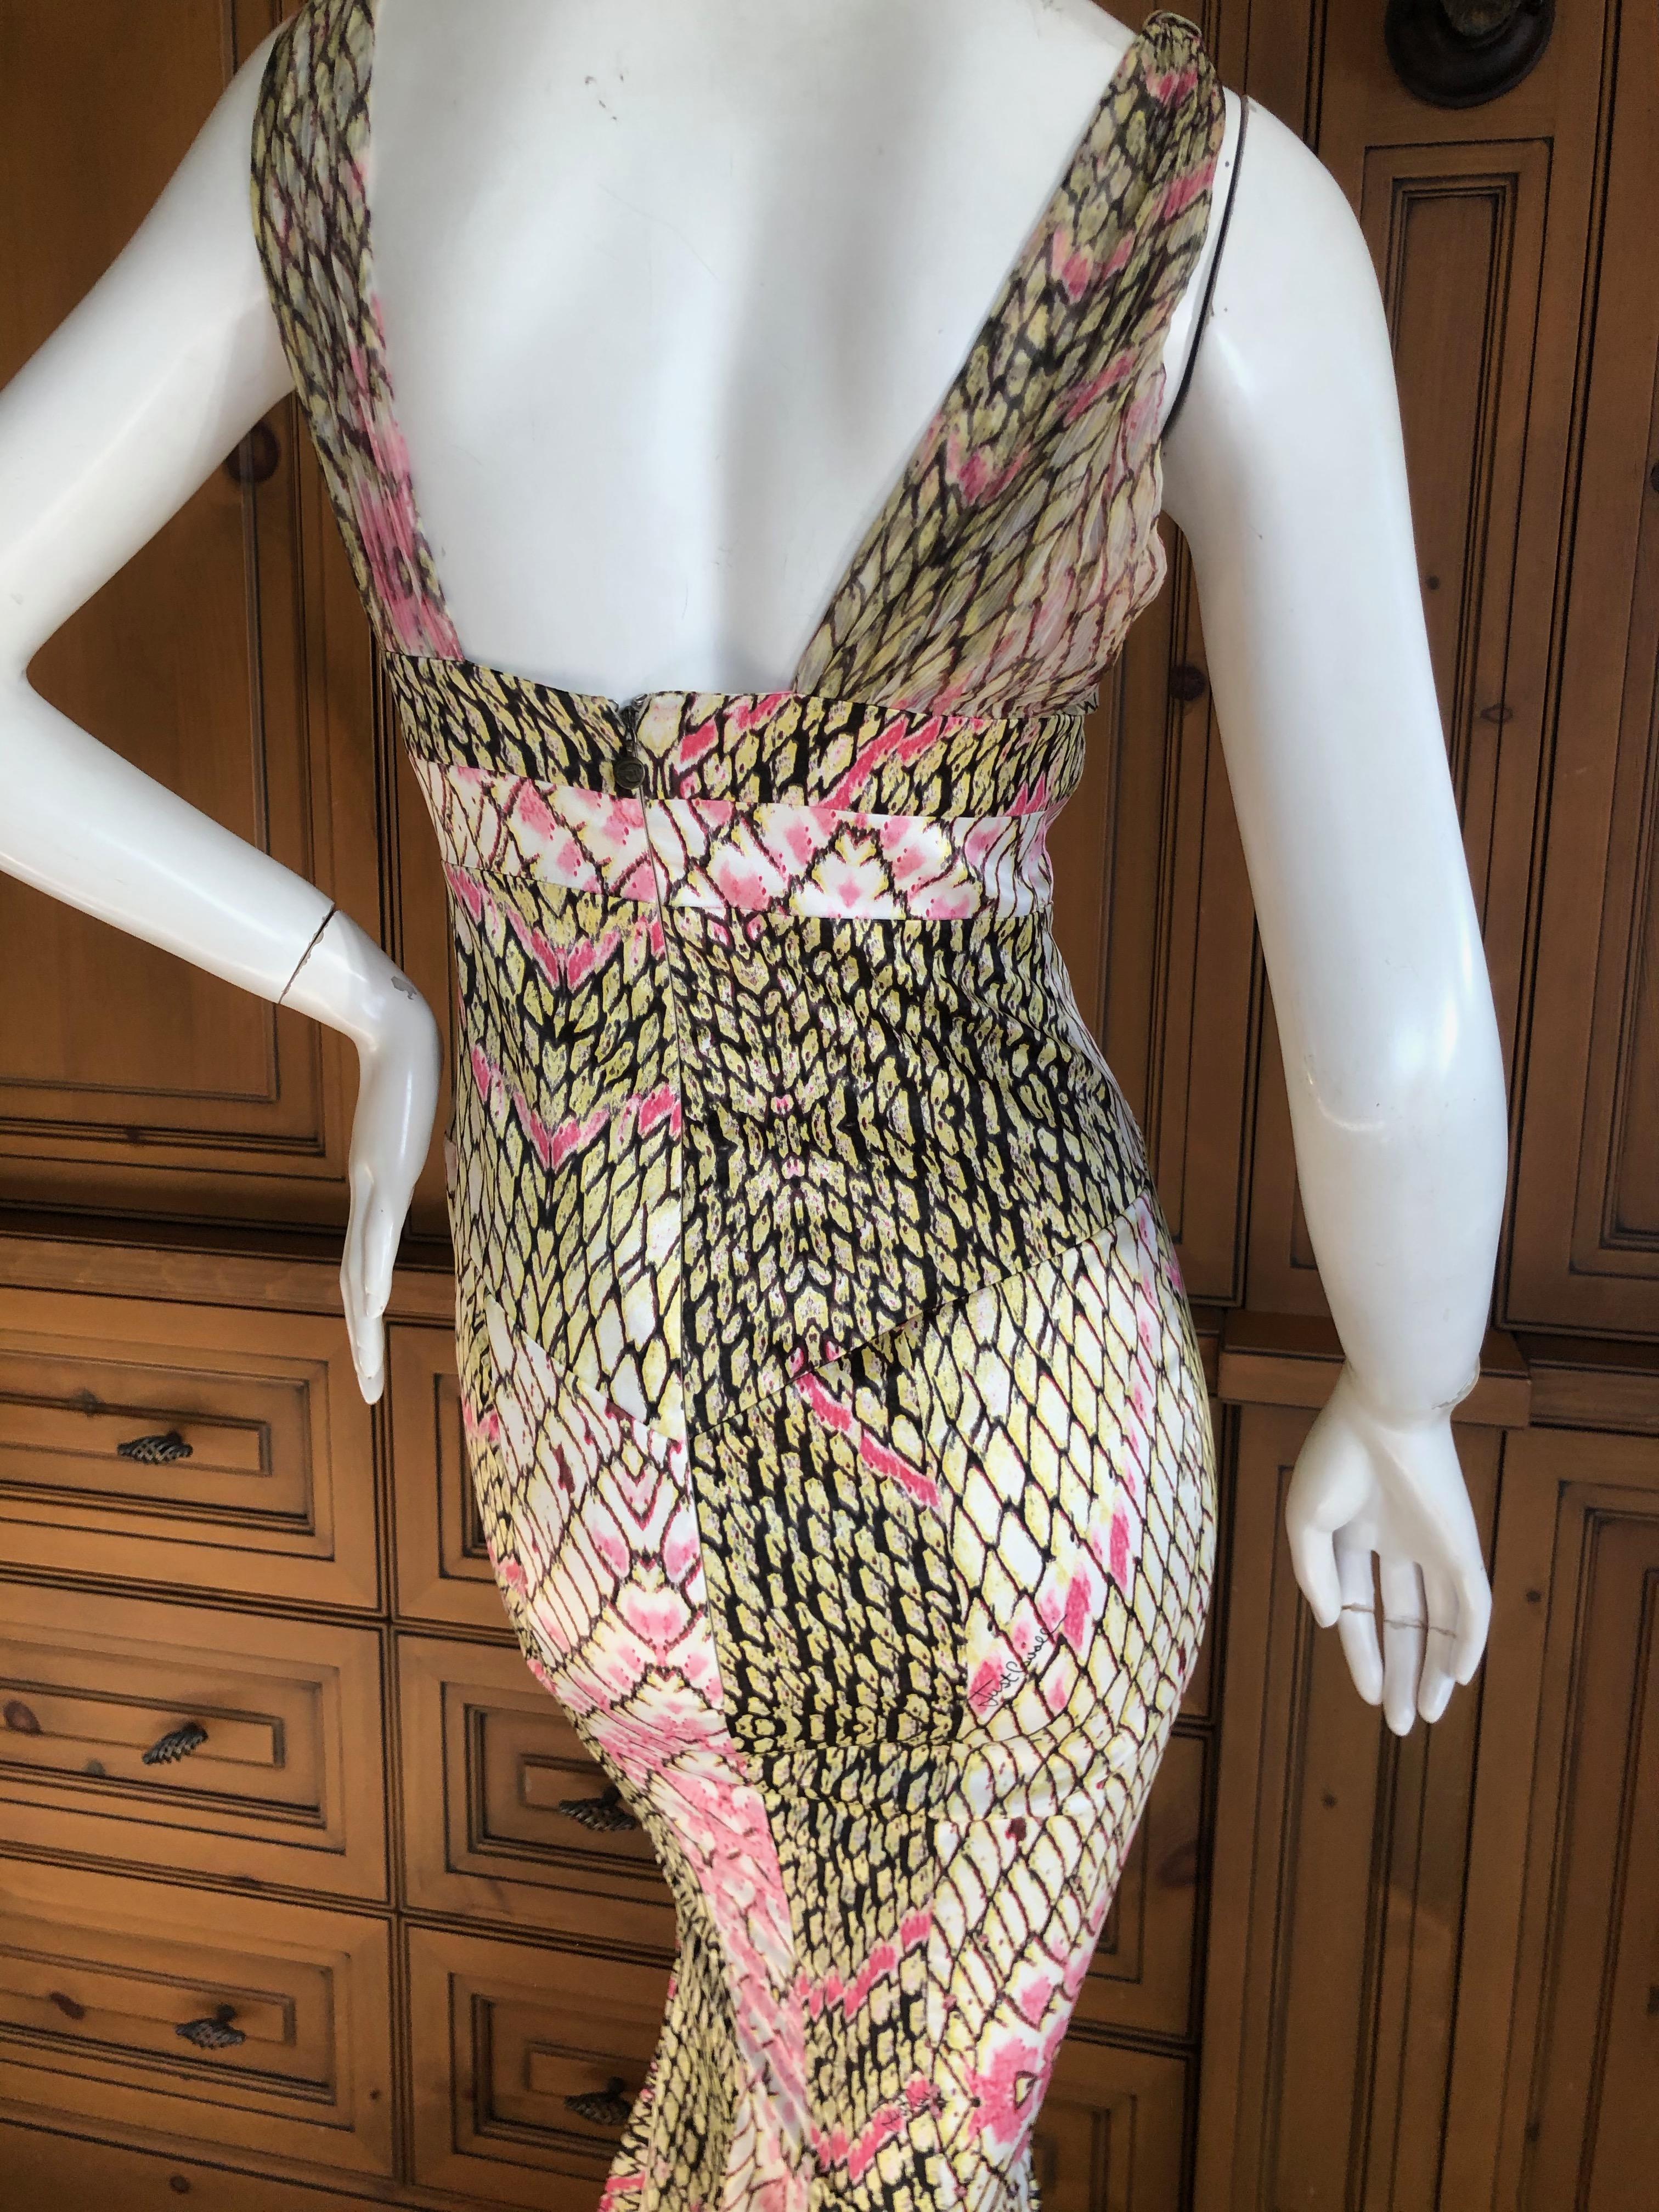 Just Cavalli by Roberto Cavalli Reptile Print Fishtail Mermaid Gown For Sale 5